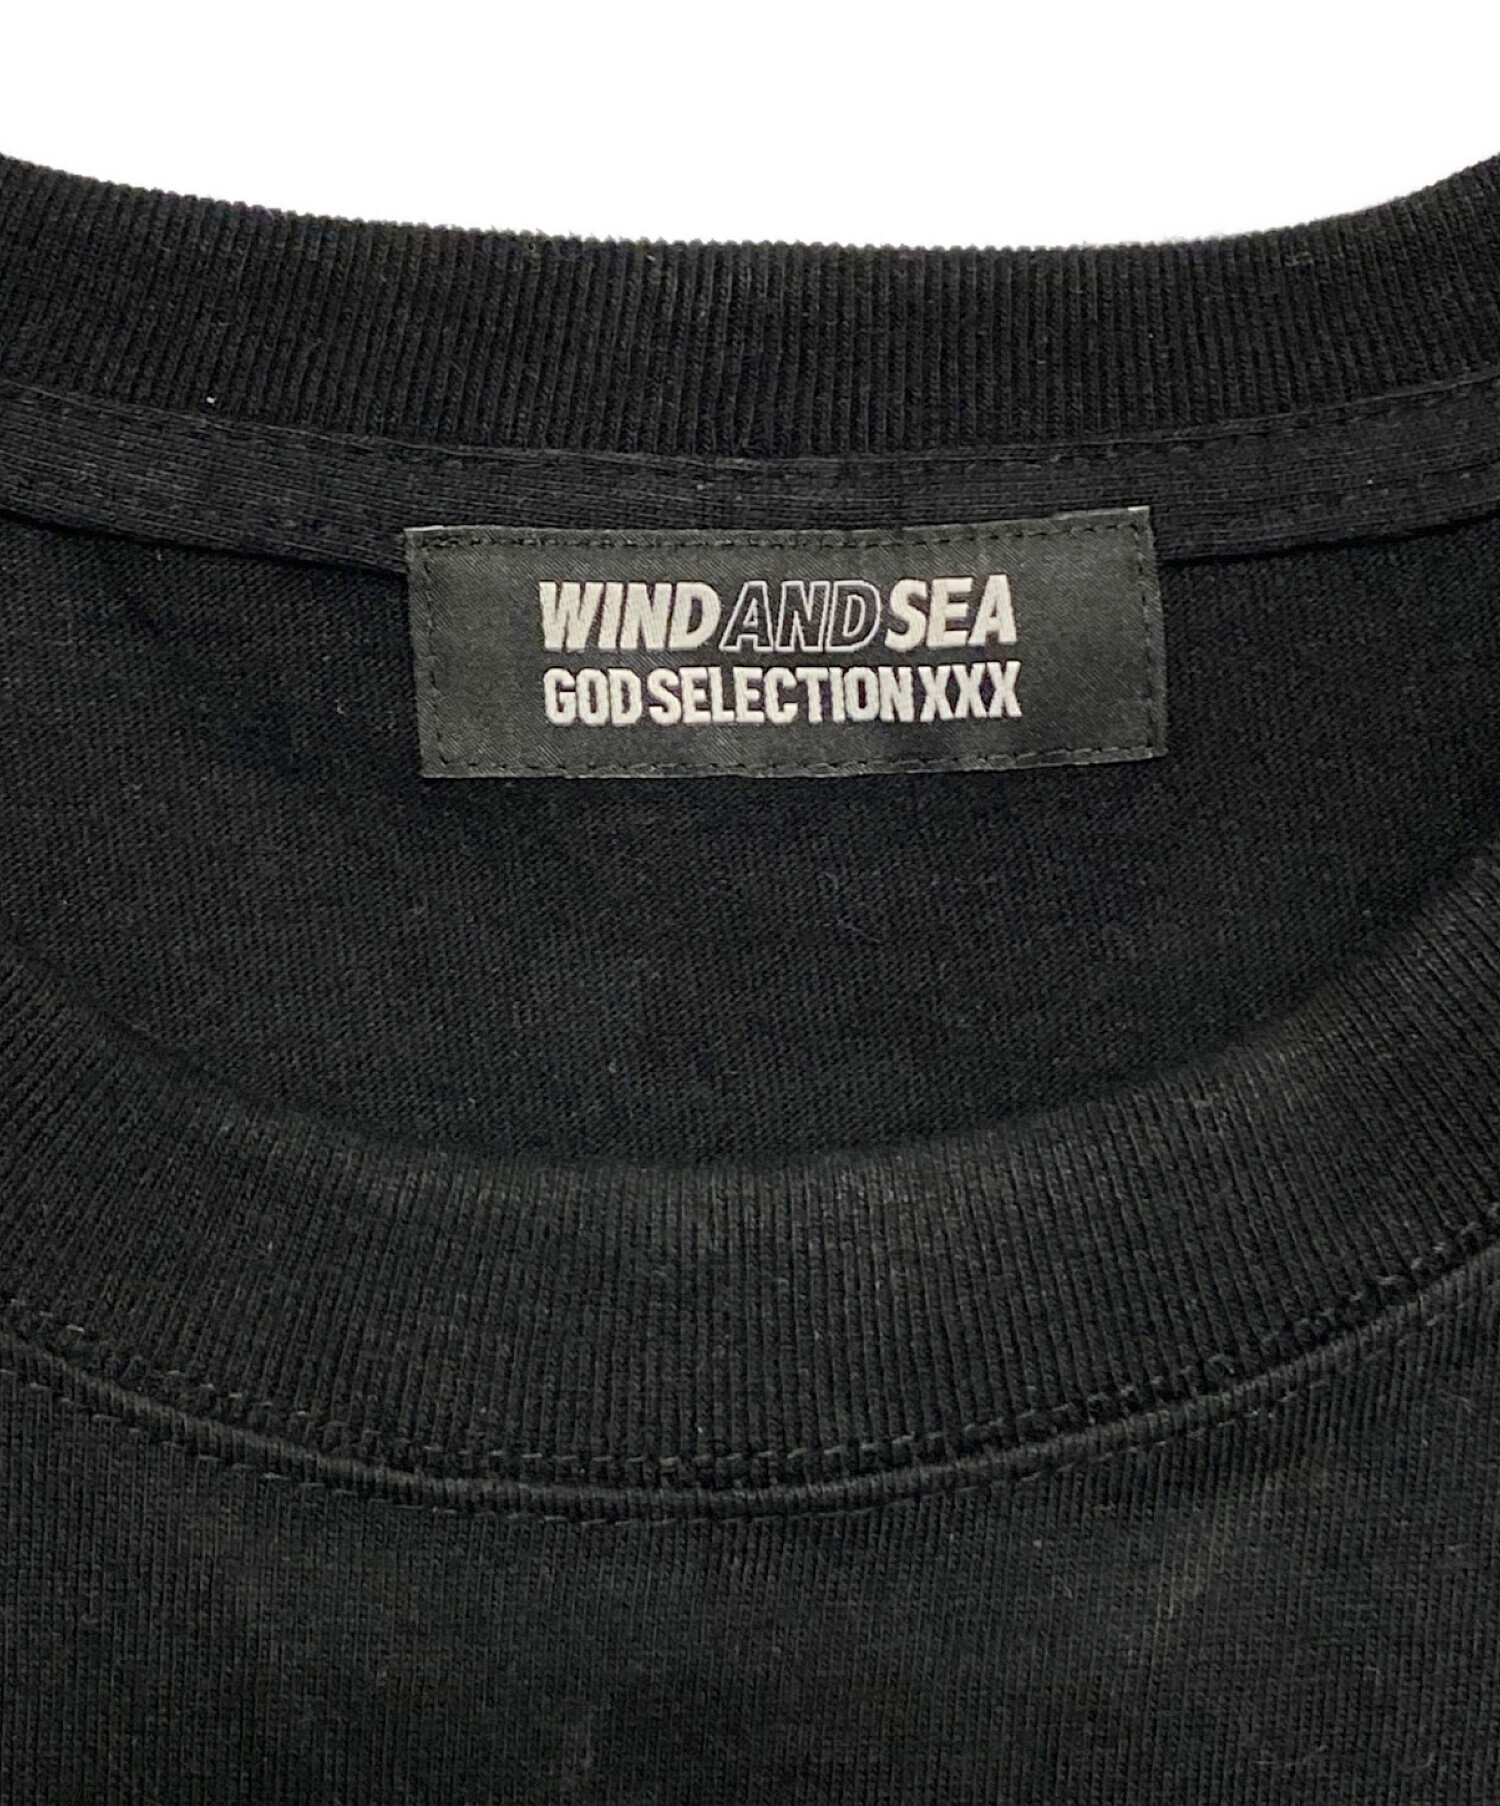 WIND AND SEA GOD SELECTION XXX Tシャツ 黒 XL